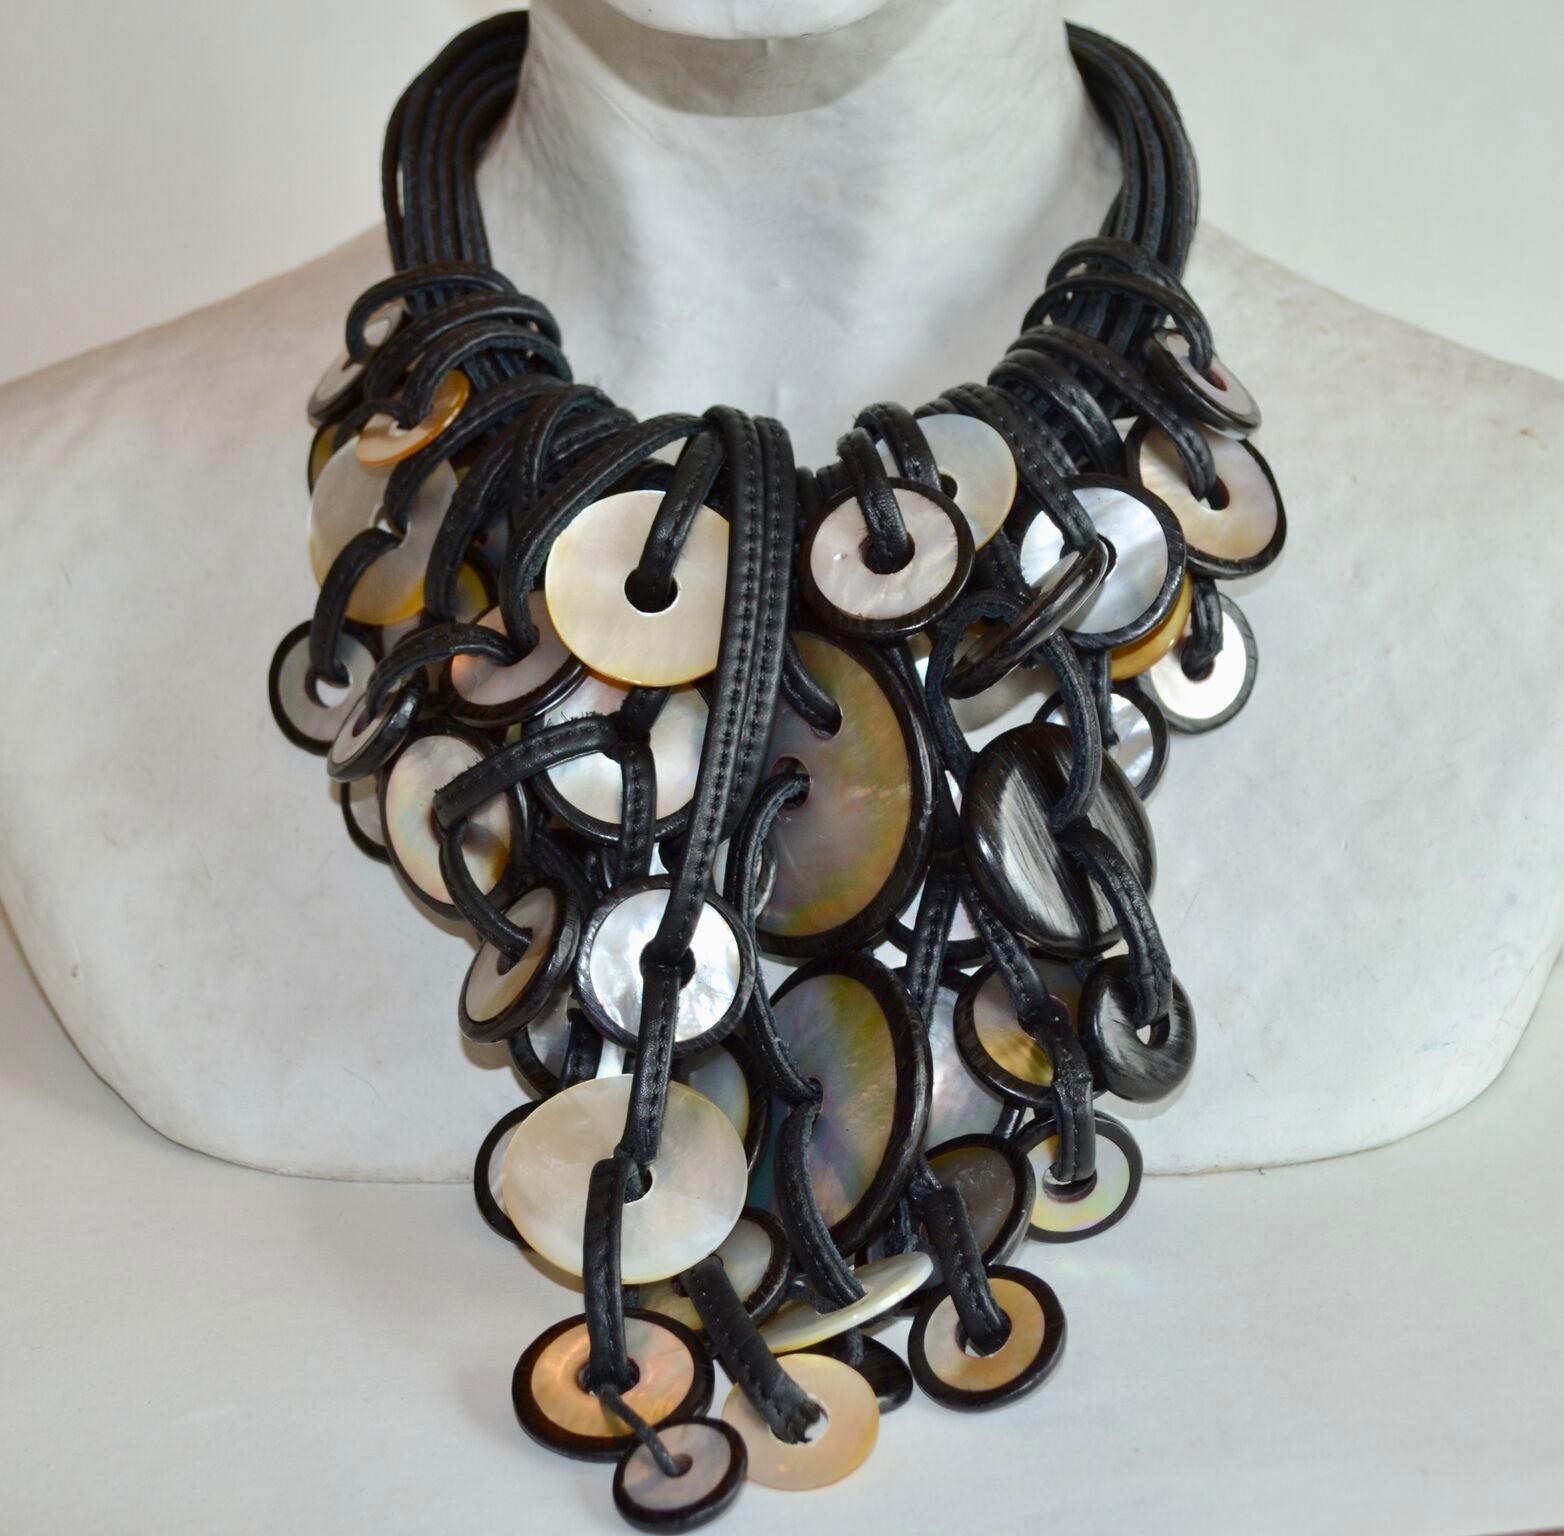 Statement piece from Monies - one of a kind. Made with mother of pearl, ebony wood and leather. 

Length of longest pendant 8”